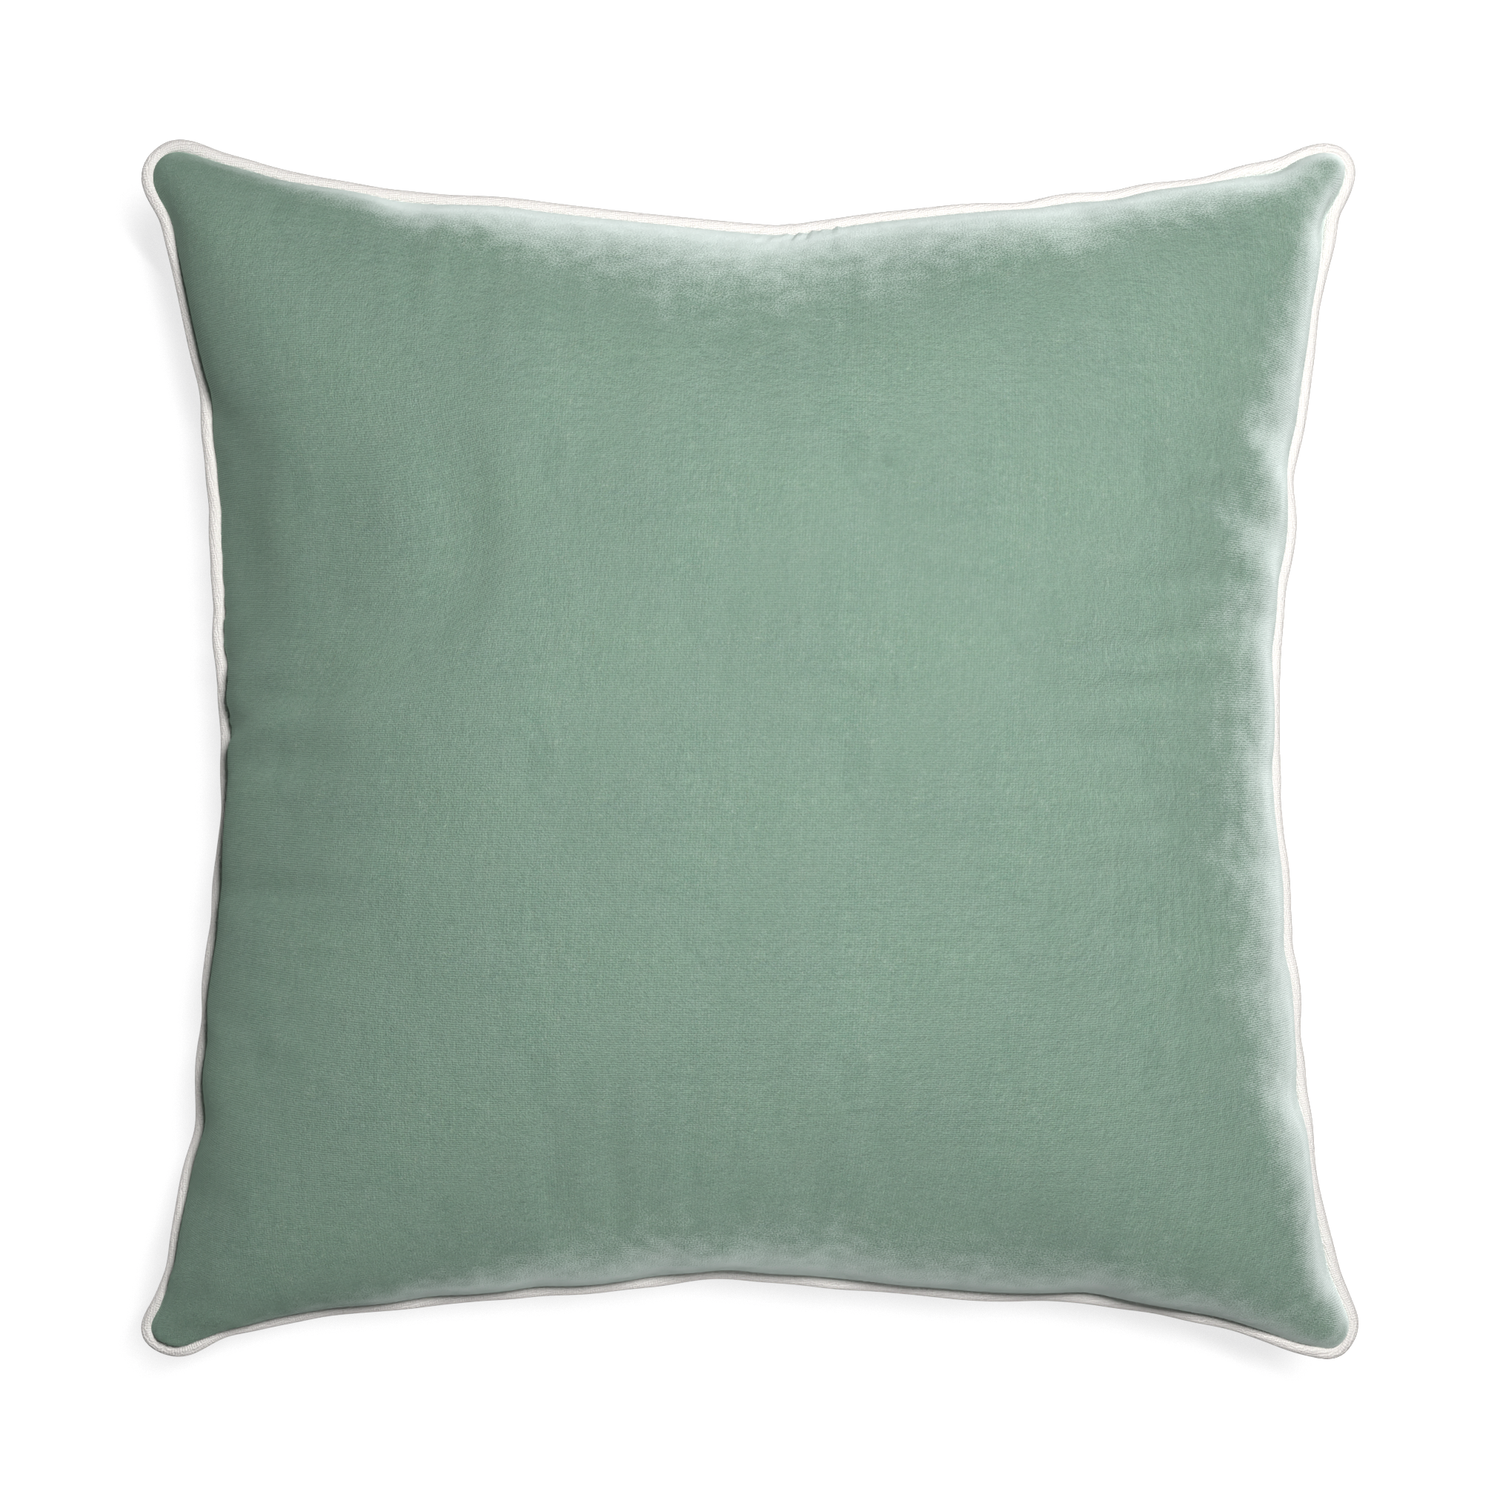 square blue green velvet pillow with white piping